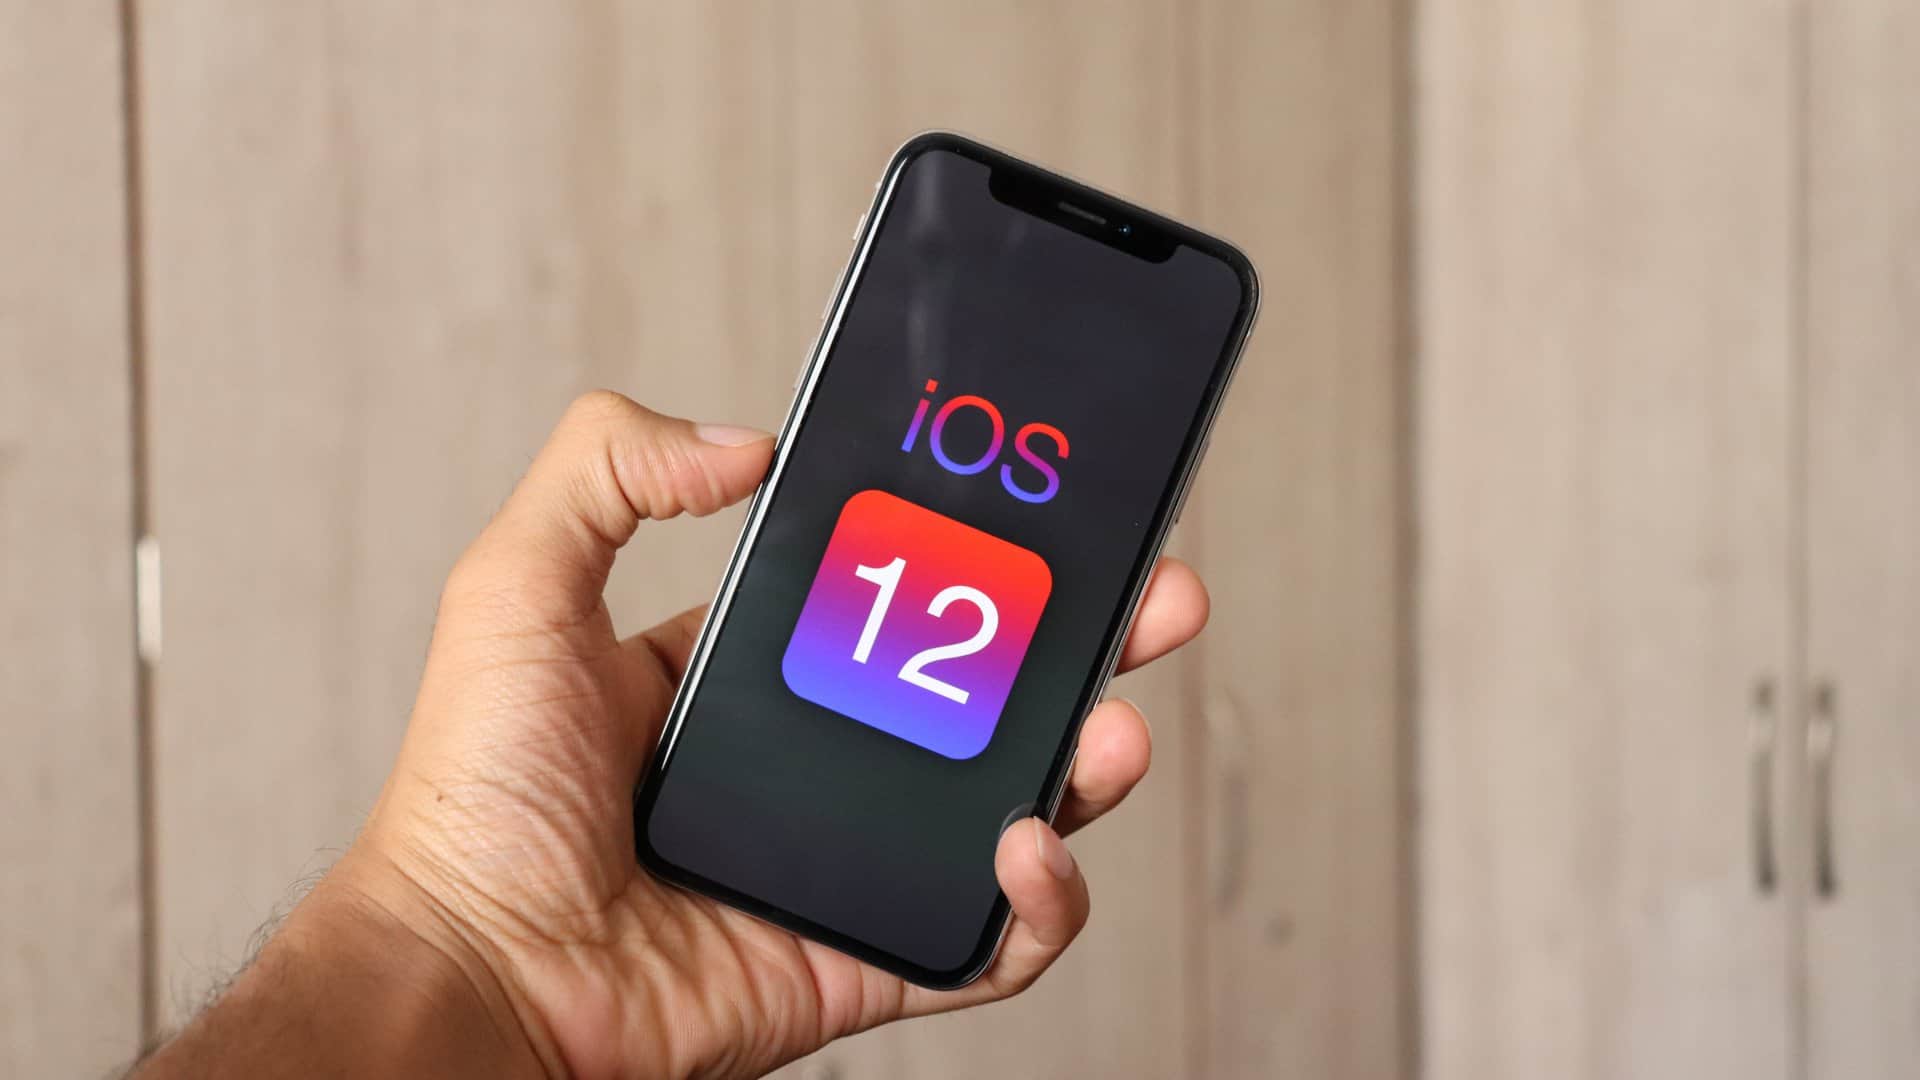 How to download and install iOS 12 beta on iPhone X